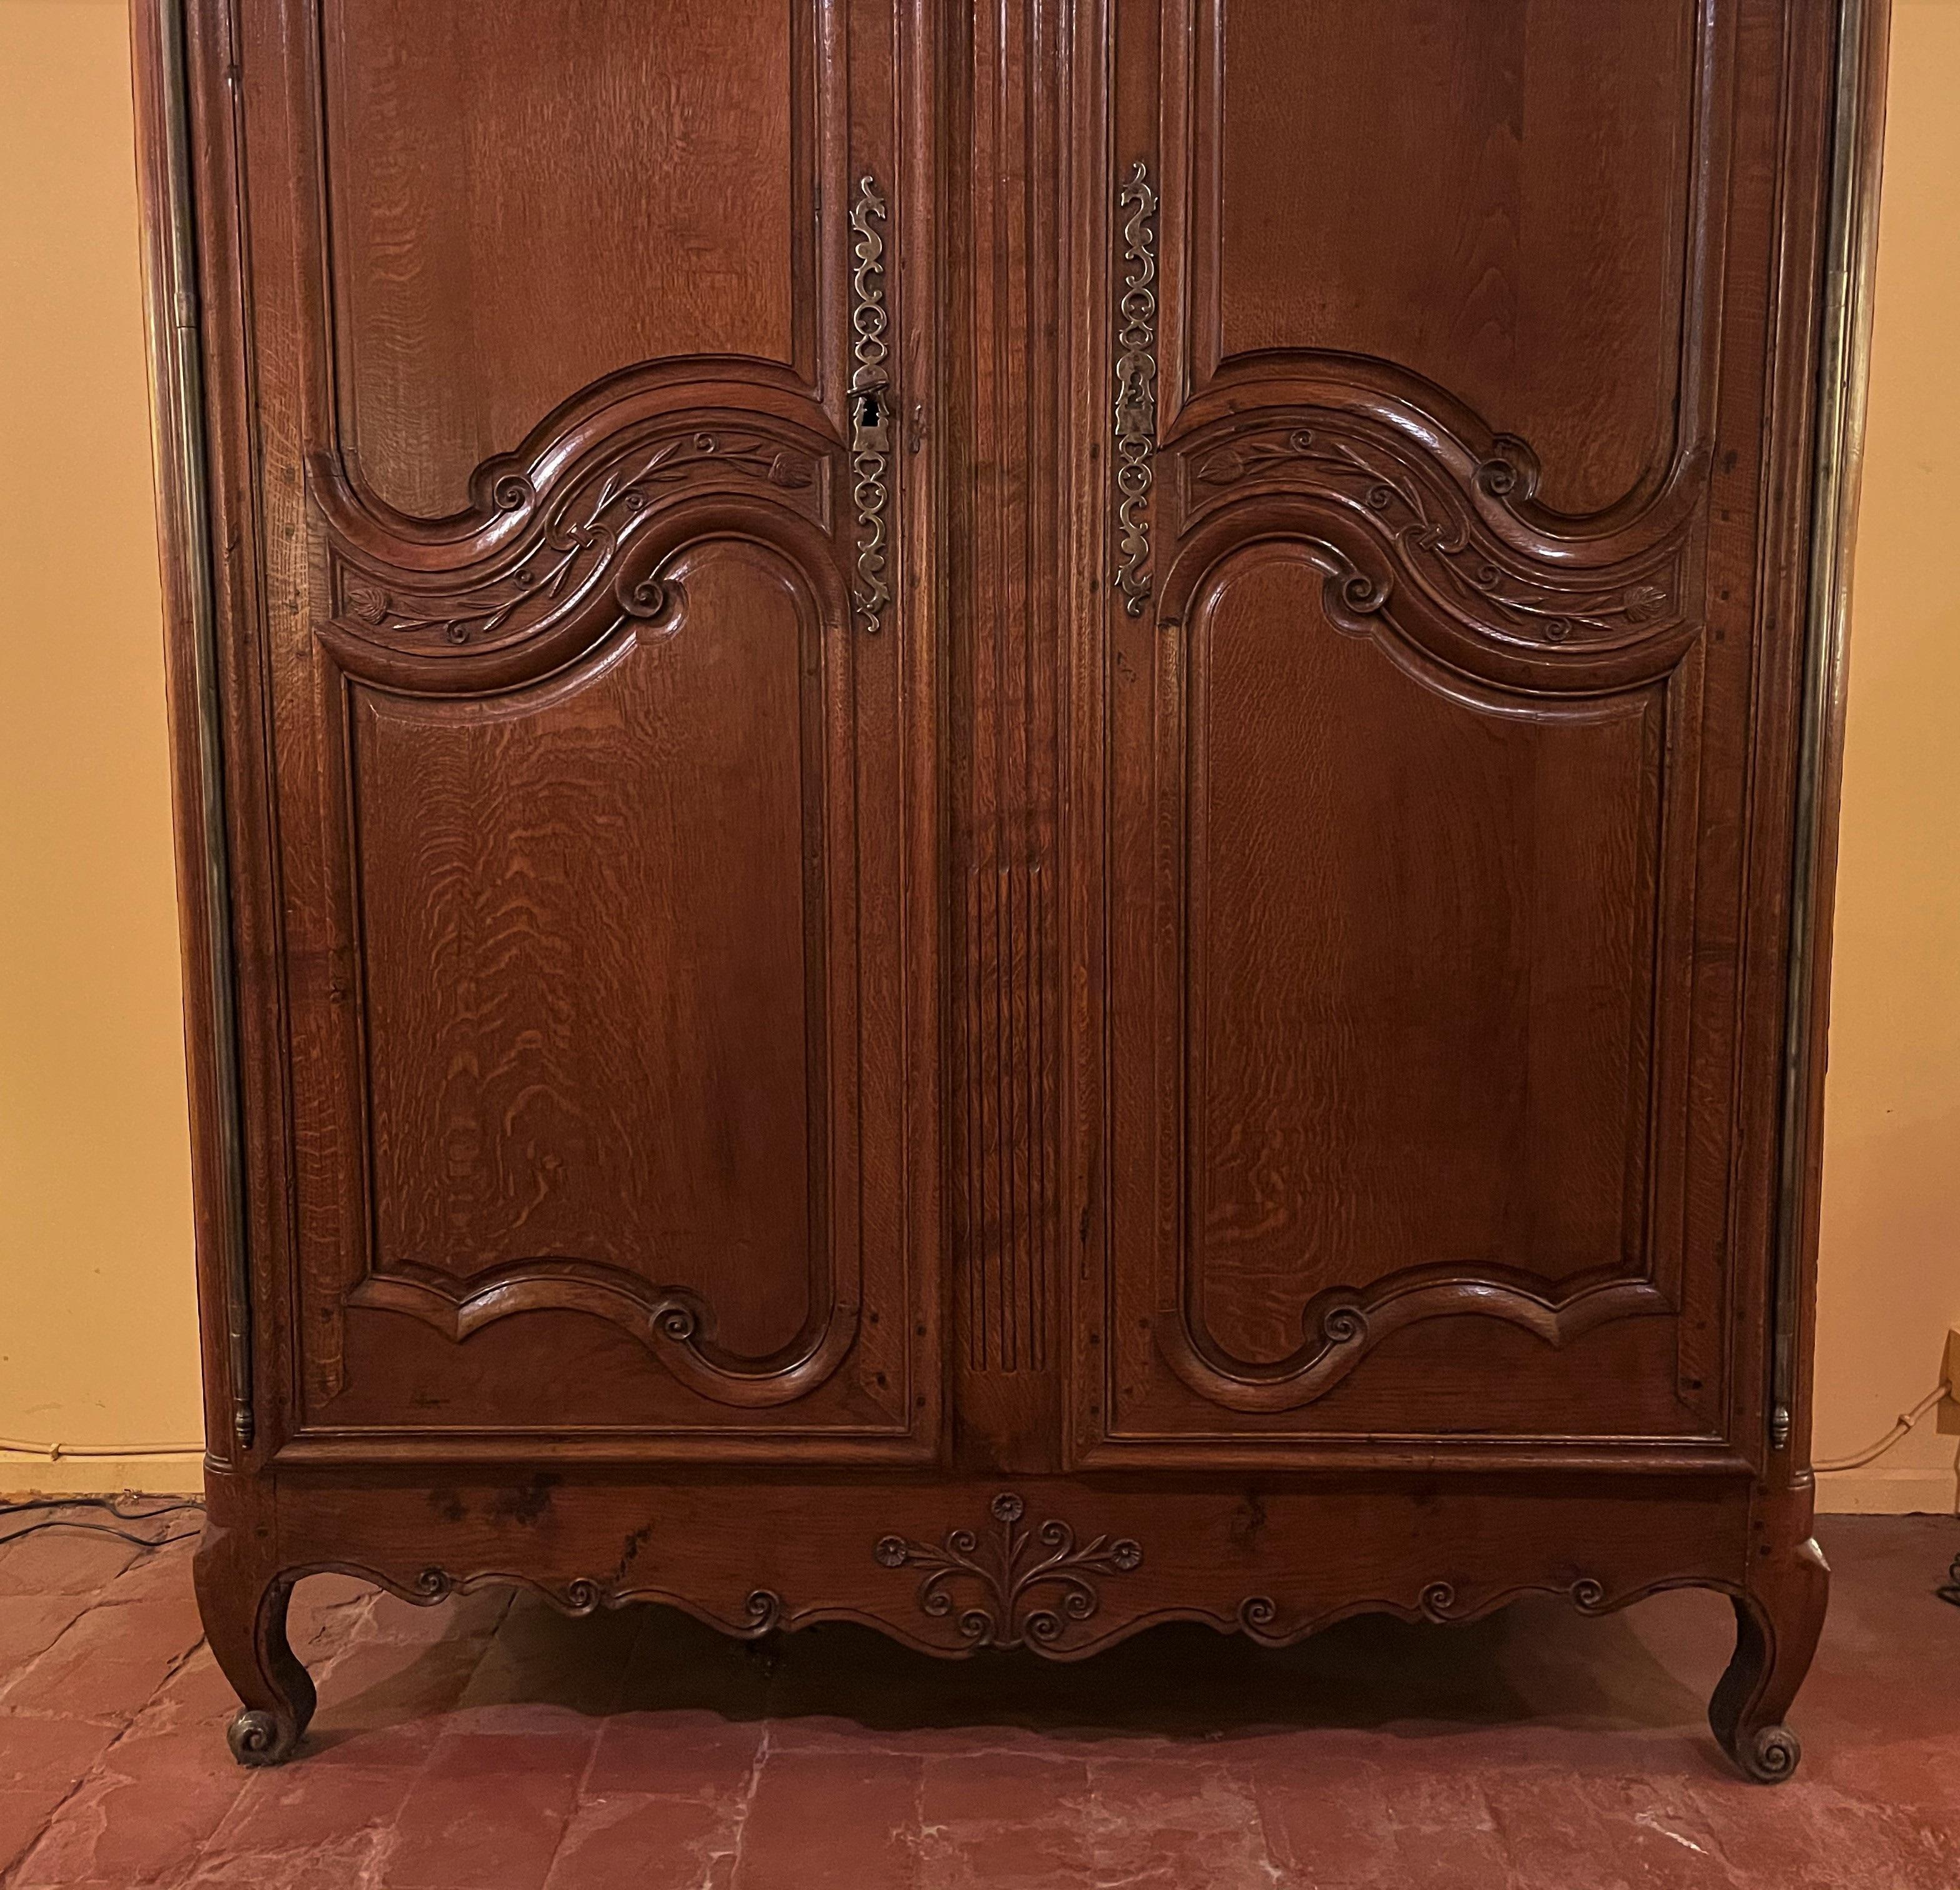 A fine wardrobe from Normandy of the 18th century in oak Louis XV-France
Superb cabinet of very good quality with a pear and lemon wood inlay in the top

The wardrobe is temporarily fitted out as a linen wardrobe, but we can of course convert